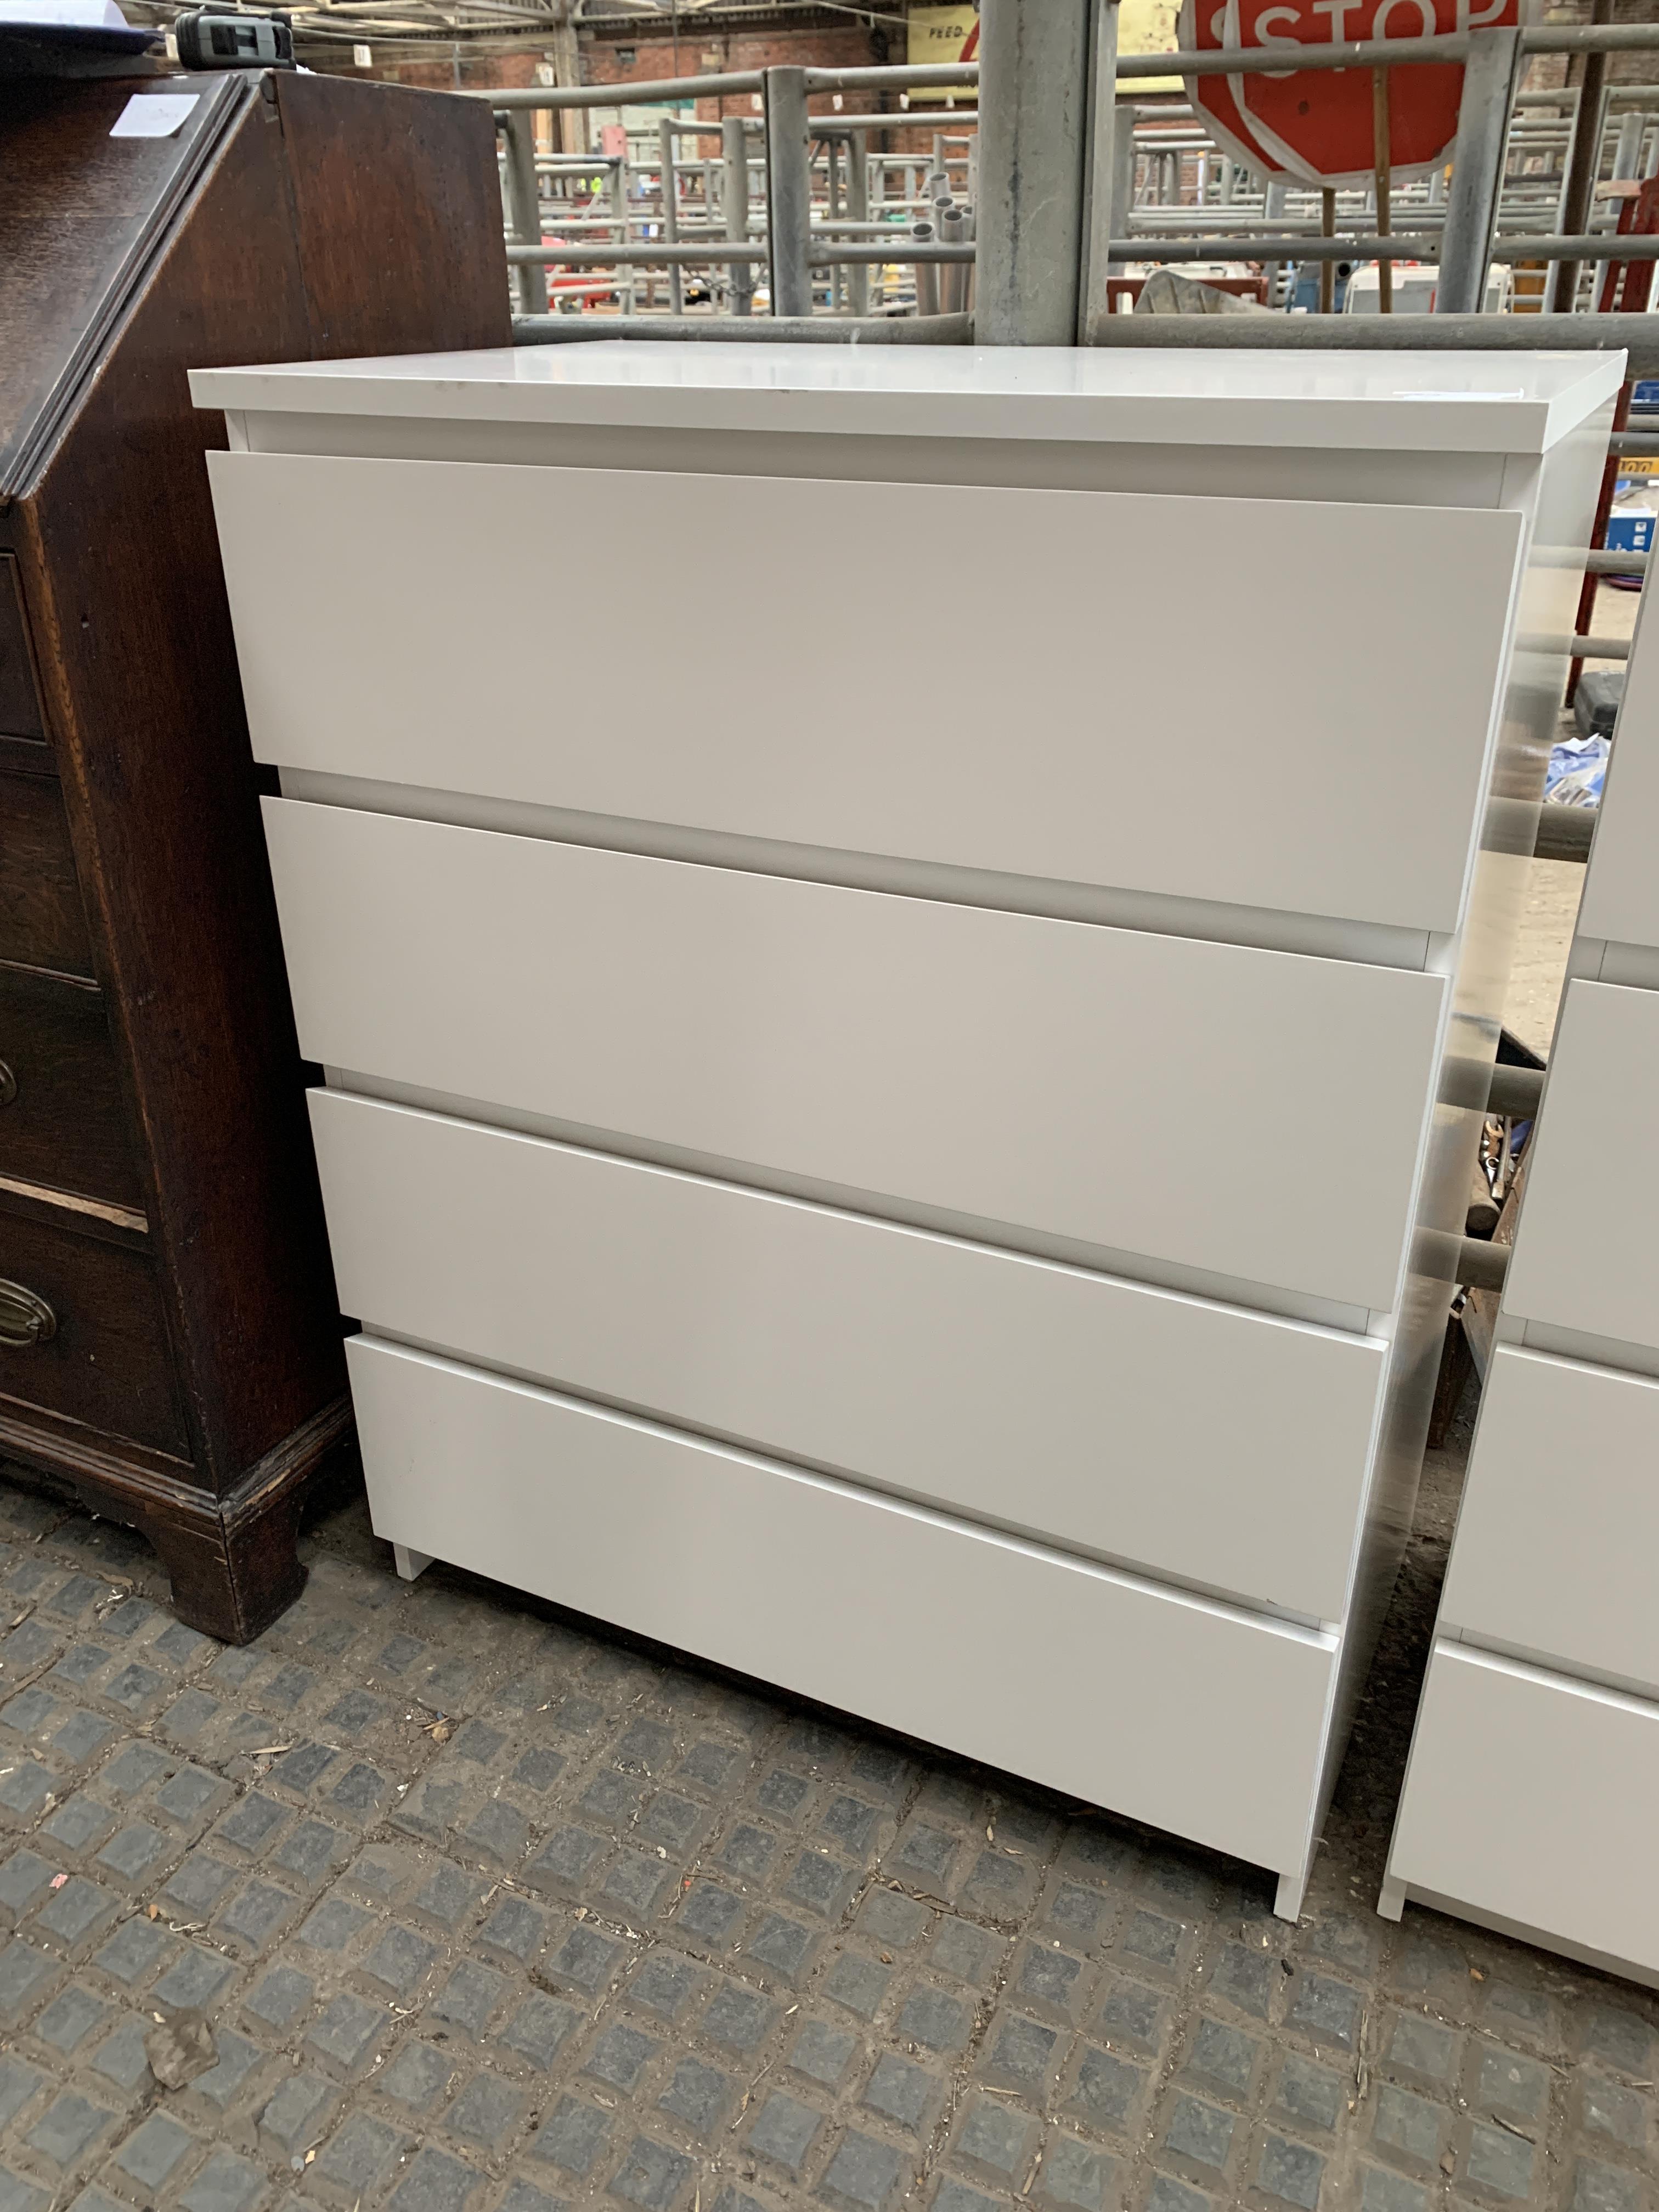 Ikea chest of four drawers